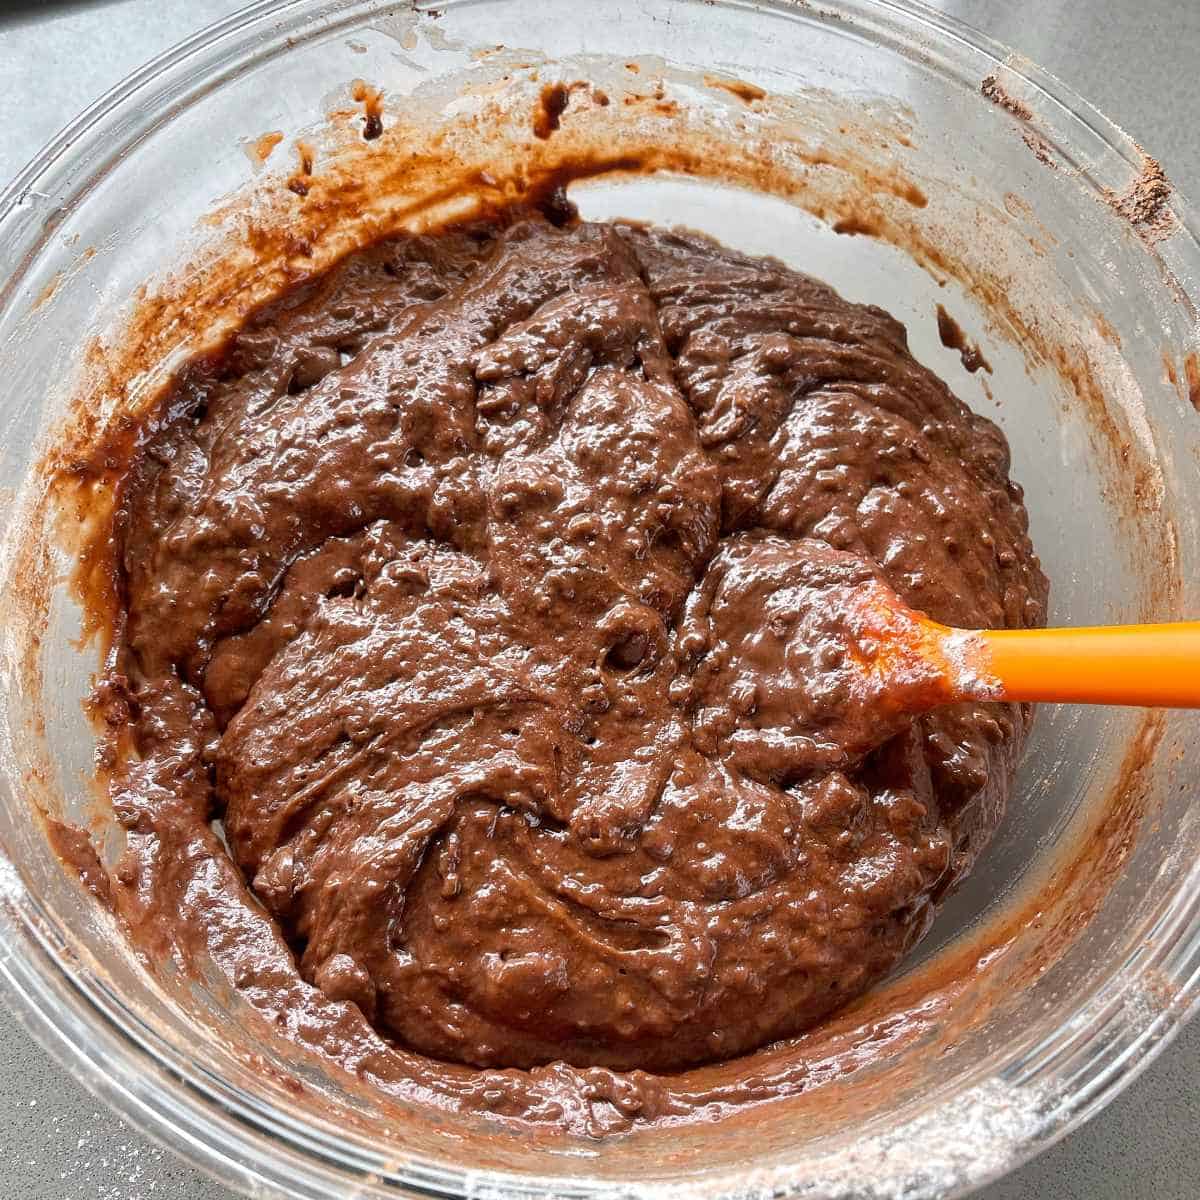 The mixed chocolate muffin mixture in a glass bowl